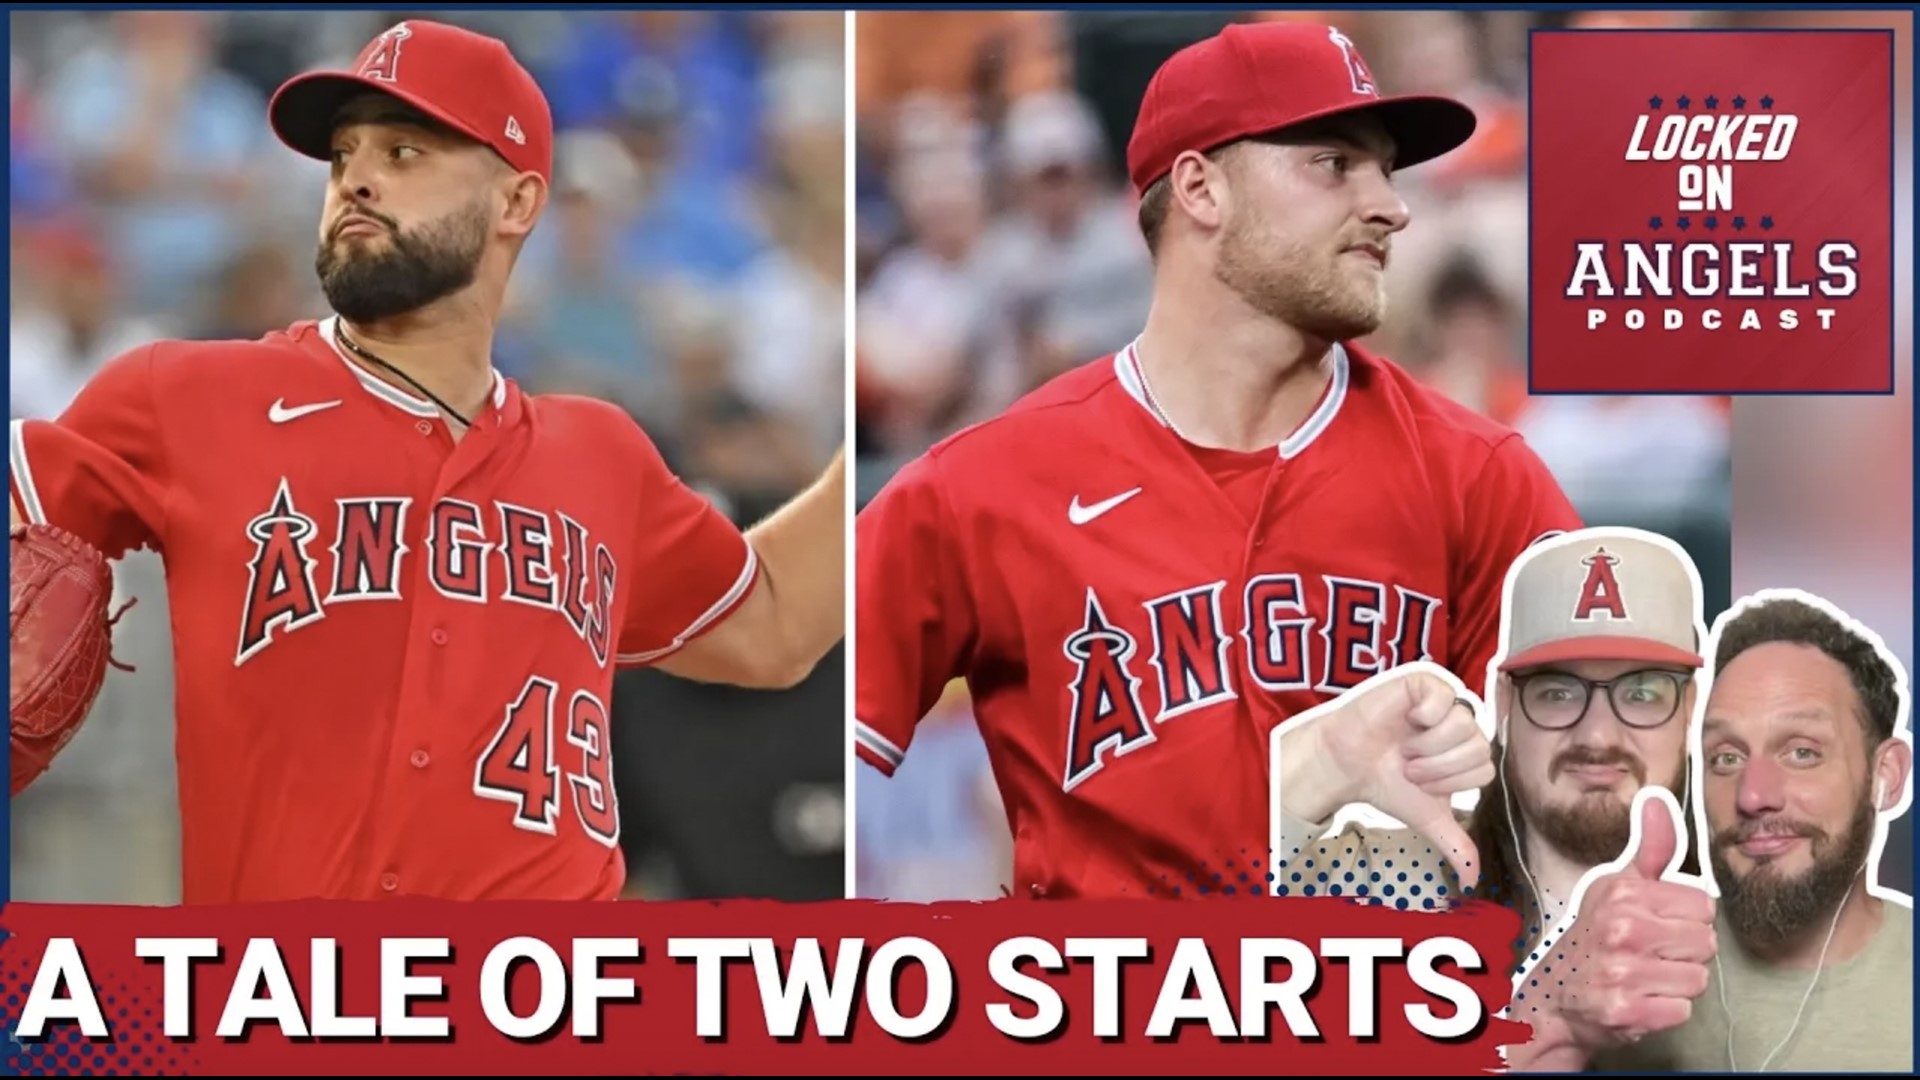 The Los Angeles Angels played 2 games yesterday, as they held split-squad games that saw Patrick Sandoval against the Oakland A's and Reid Detmers versus the Cubs